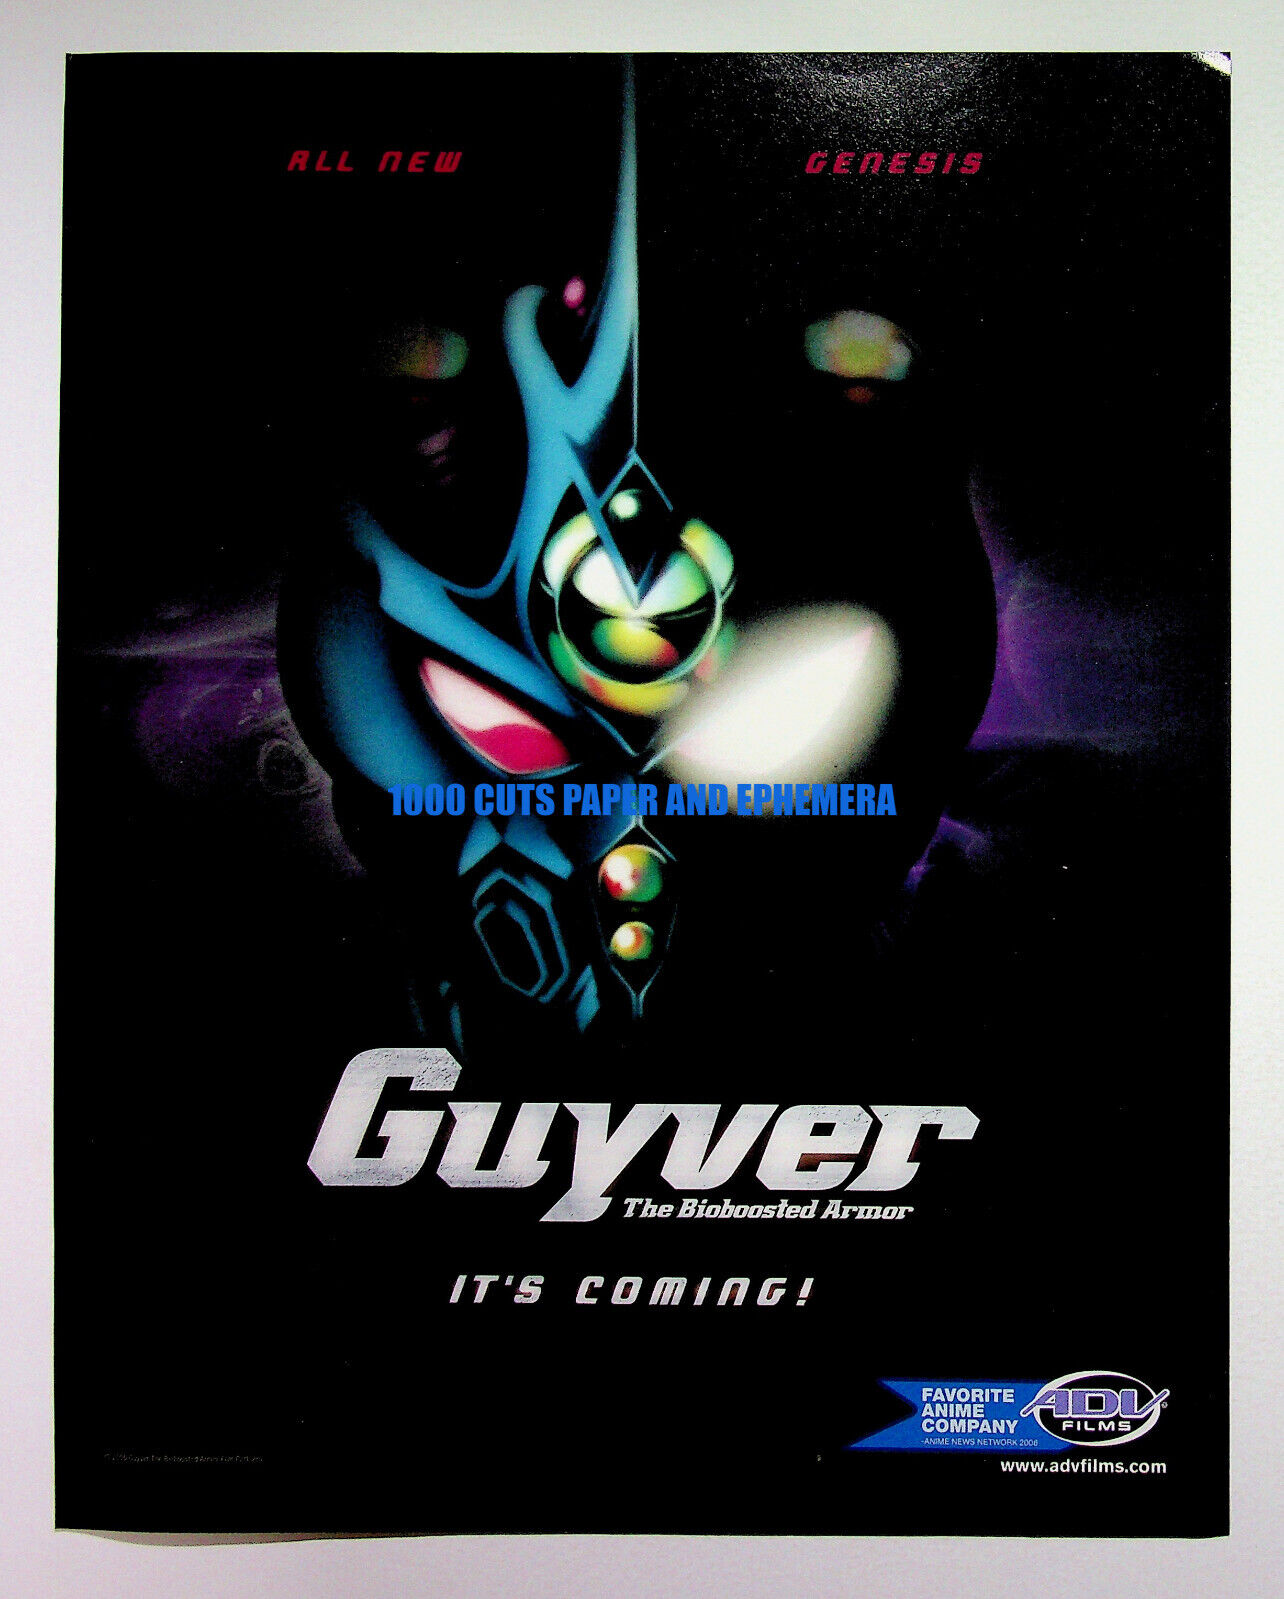 Guyver the Bioboosted Armor ADV Films 2006 Trade Print Magazine Ad Poster ADVERT